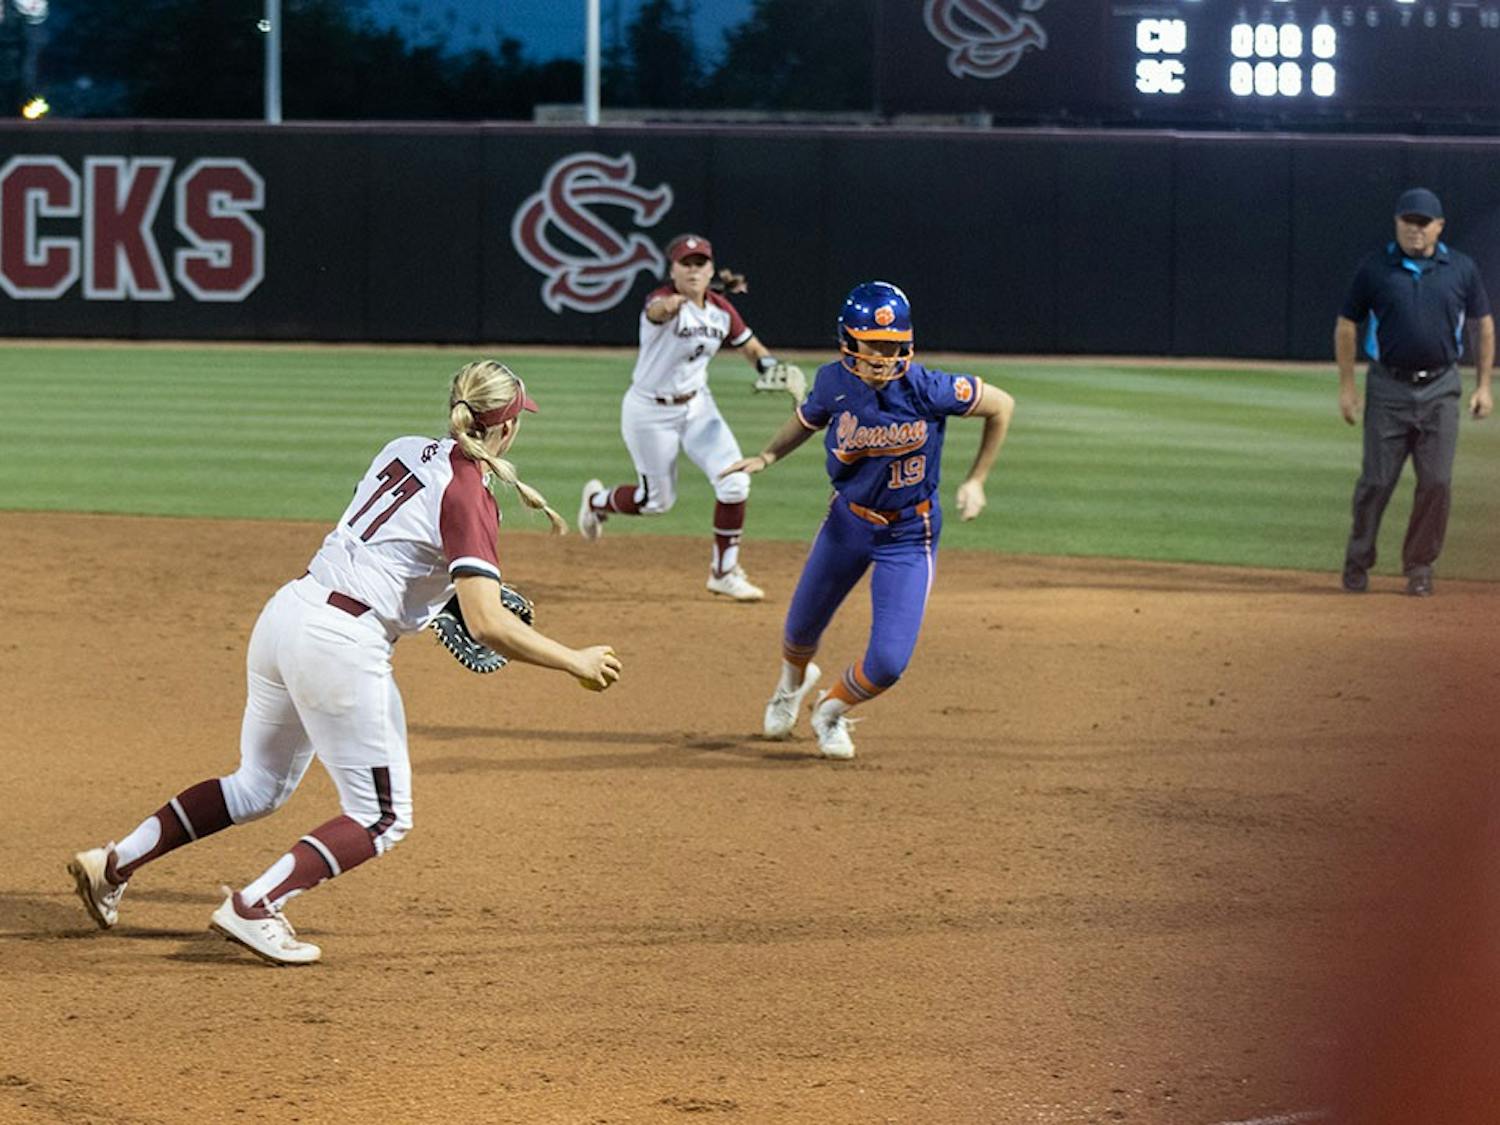 Senior infielder Kassidy Krupit heading back to first base to out a Clemson player attempting to steal second base on April 12, 2022 at the Carolina Softball Stadium in Columbia, SC. Krupit made seven putouts during the game against Clemson.